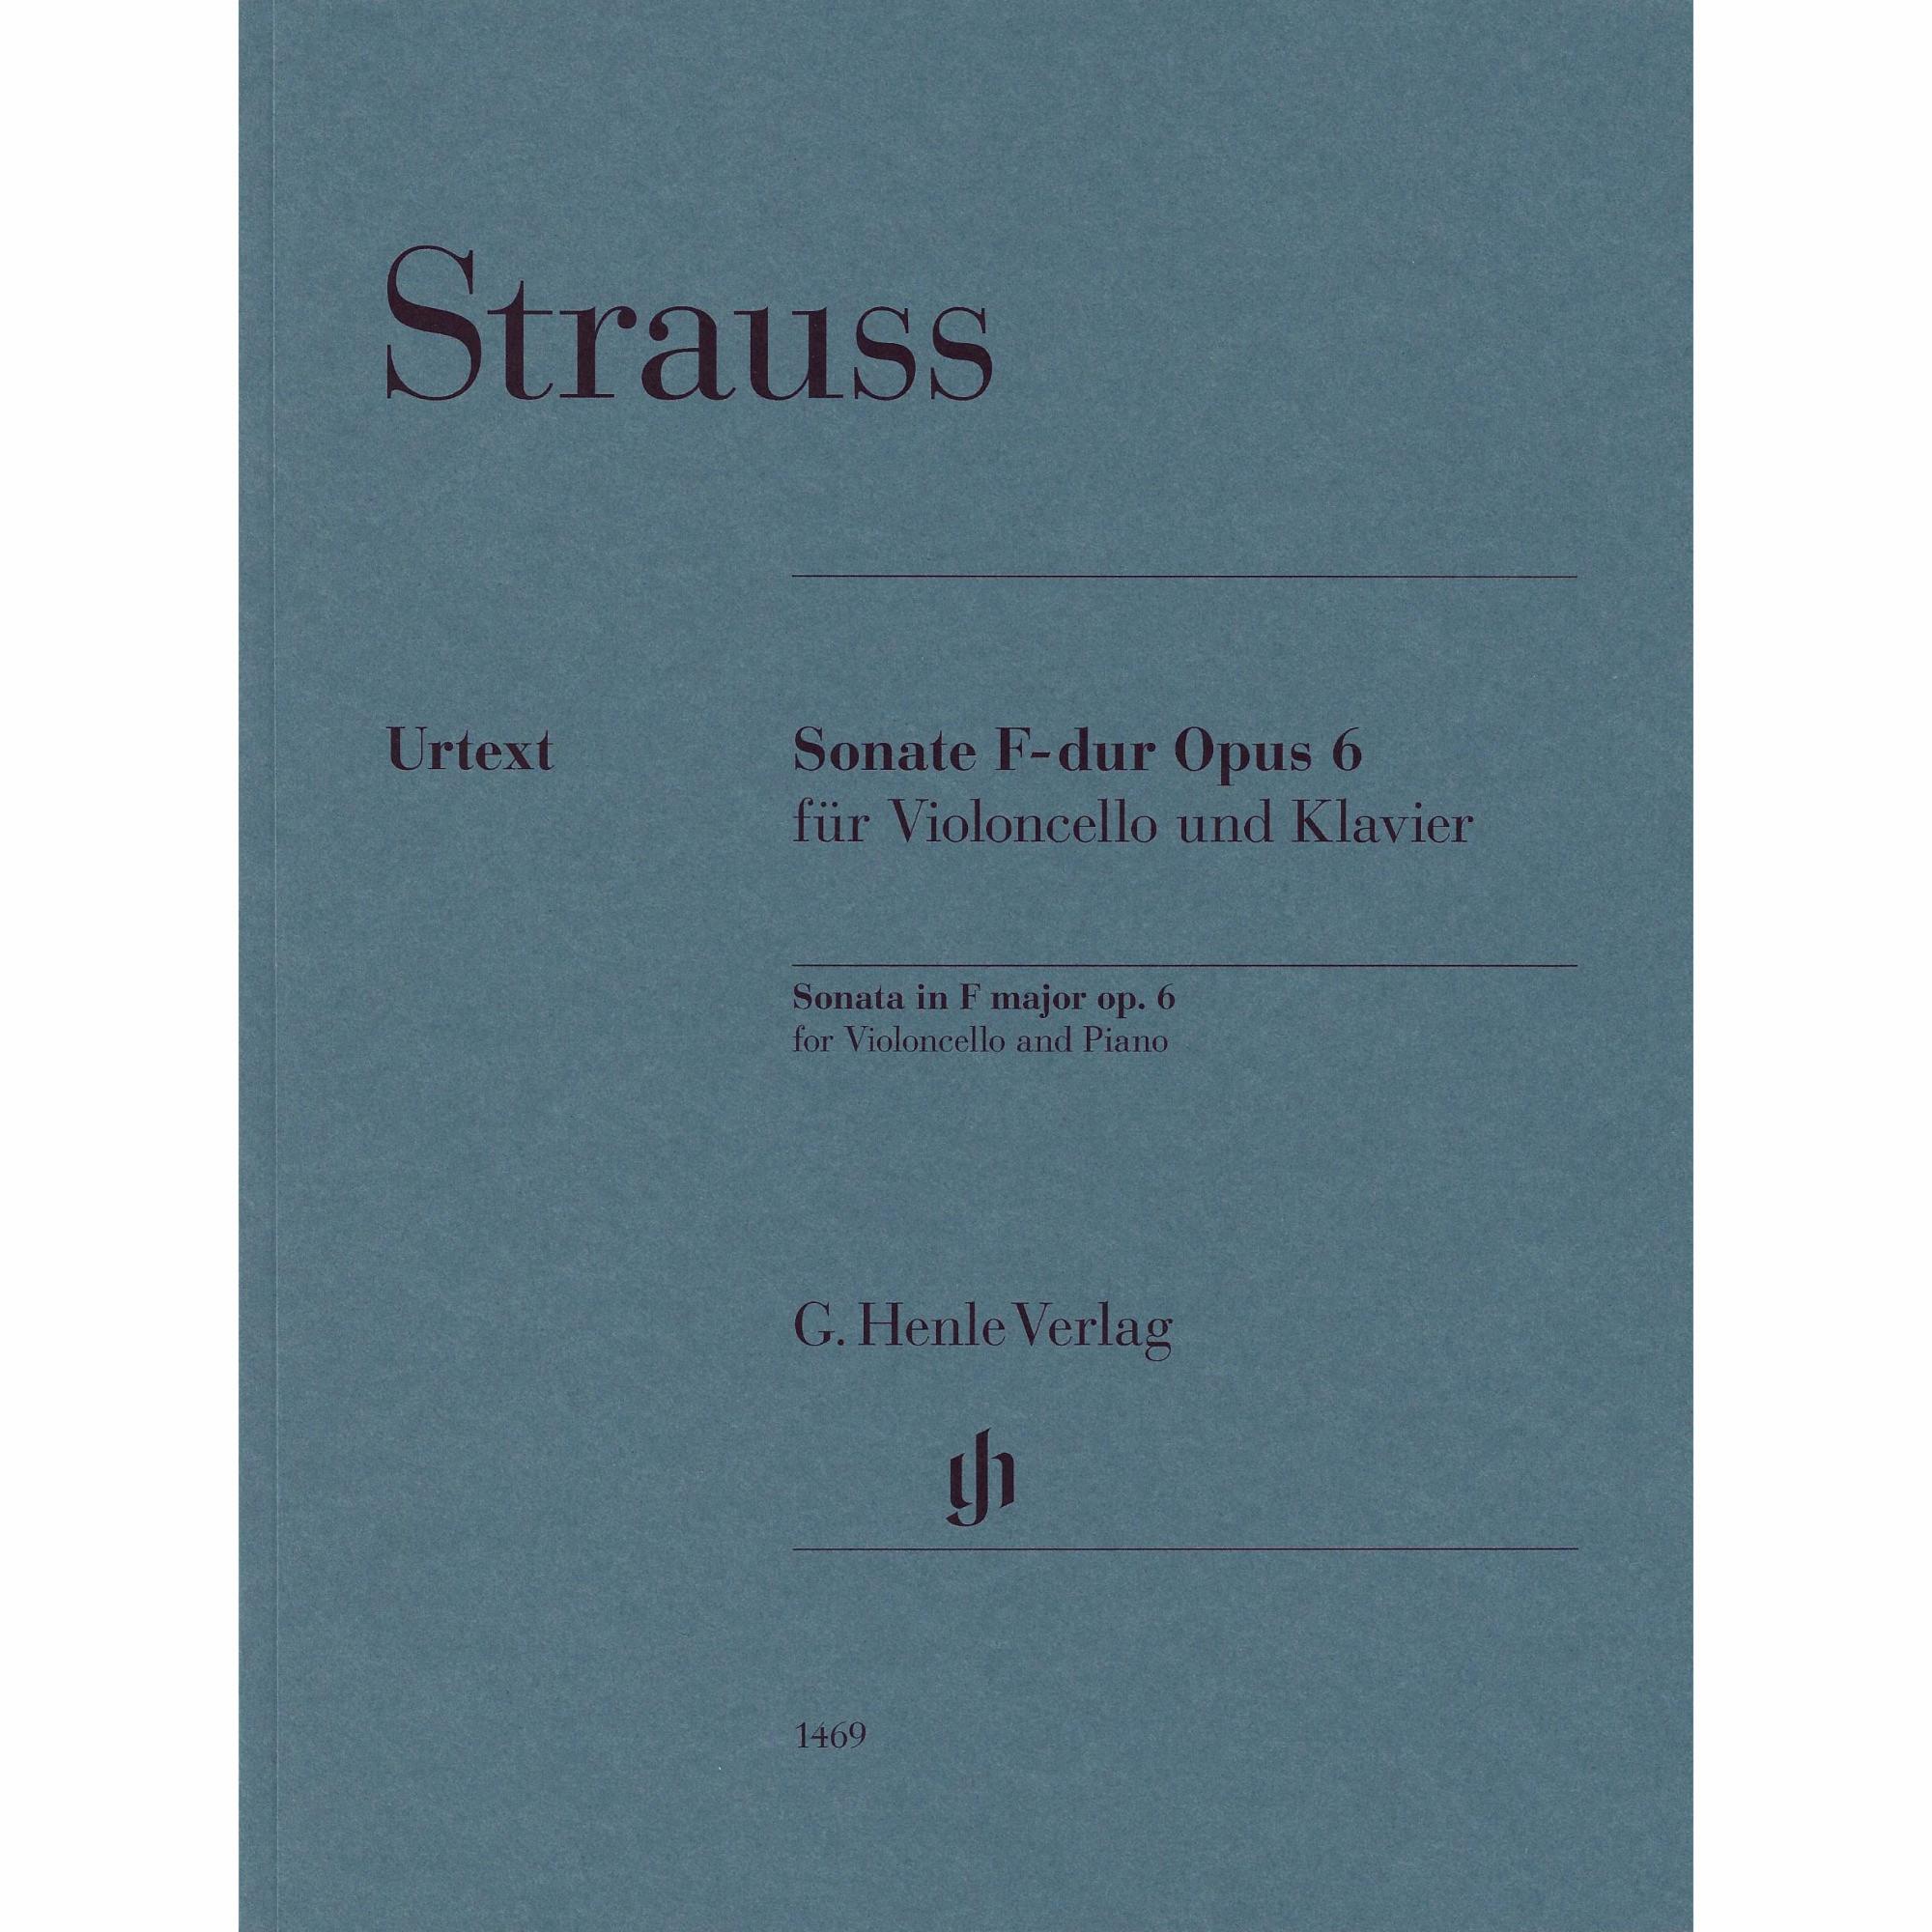 Strauss -- Sonata in F Major, Op. 6 for Cello and Piano